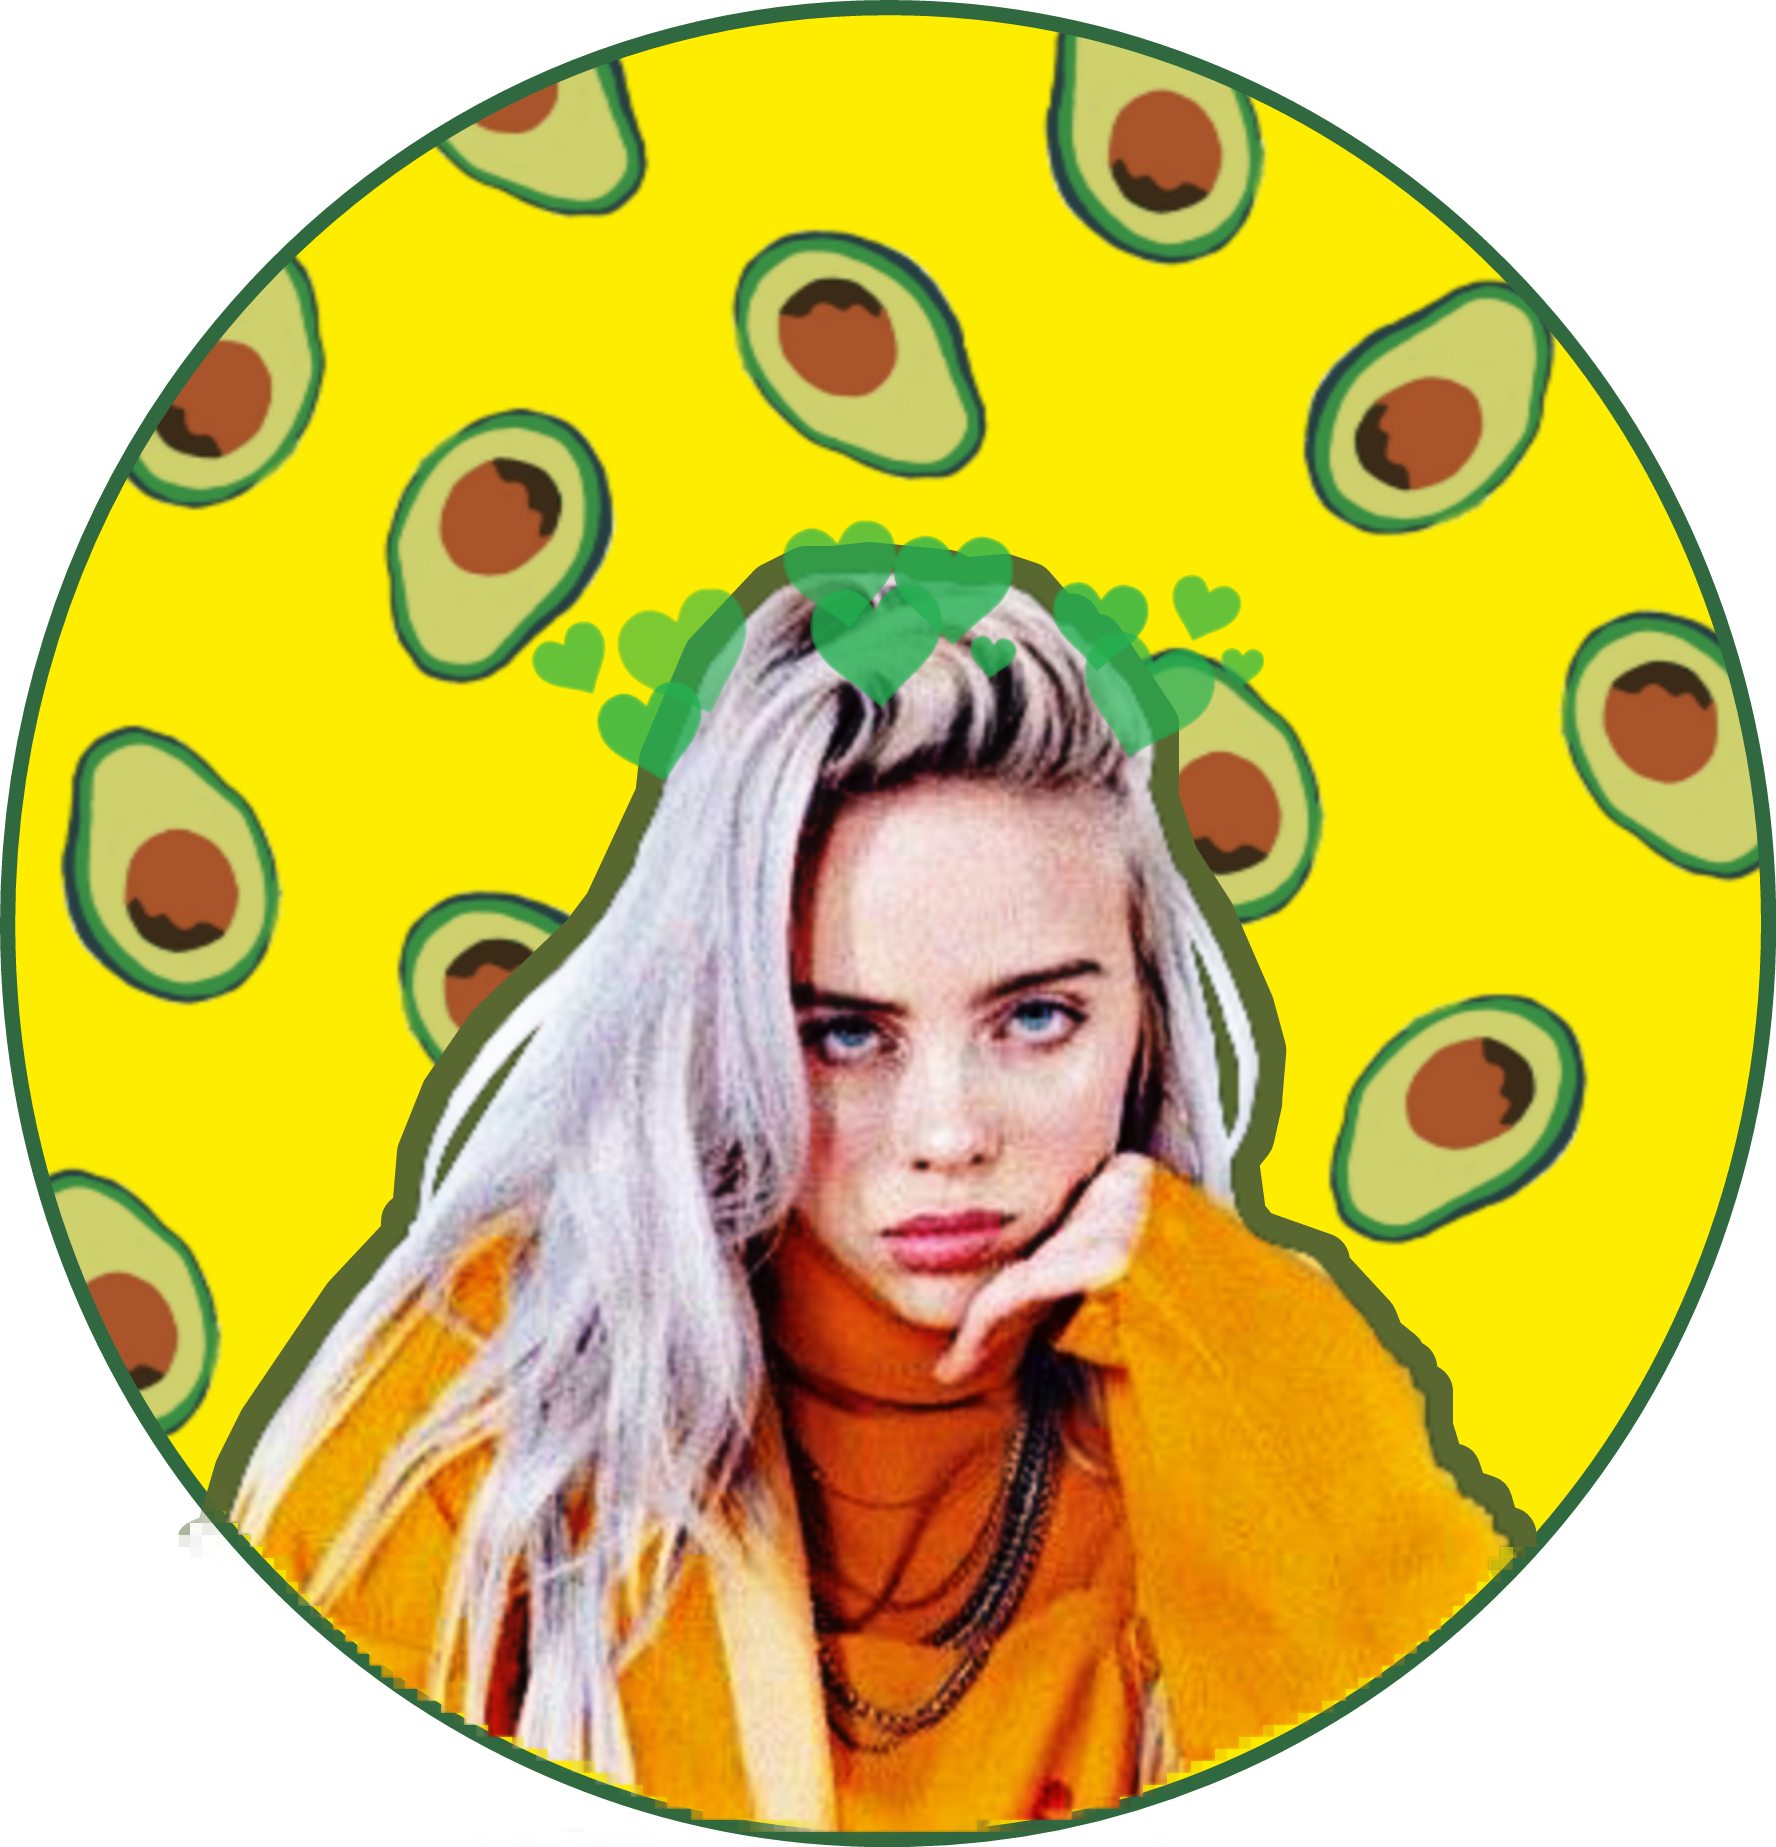 billie eilish billieeilish billieeilishedit instagram... - 1776 x 1847 png 1910kB